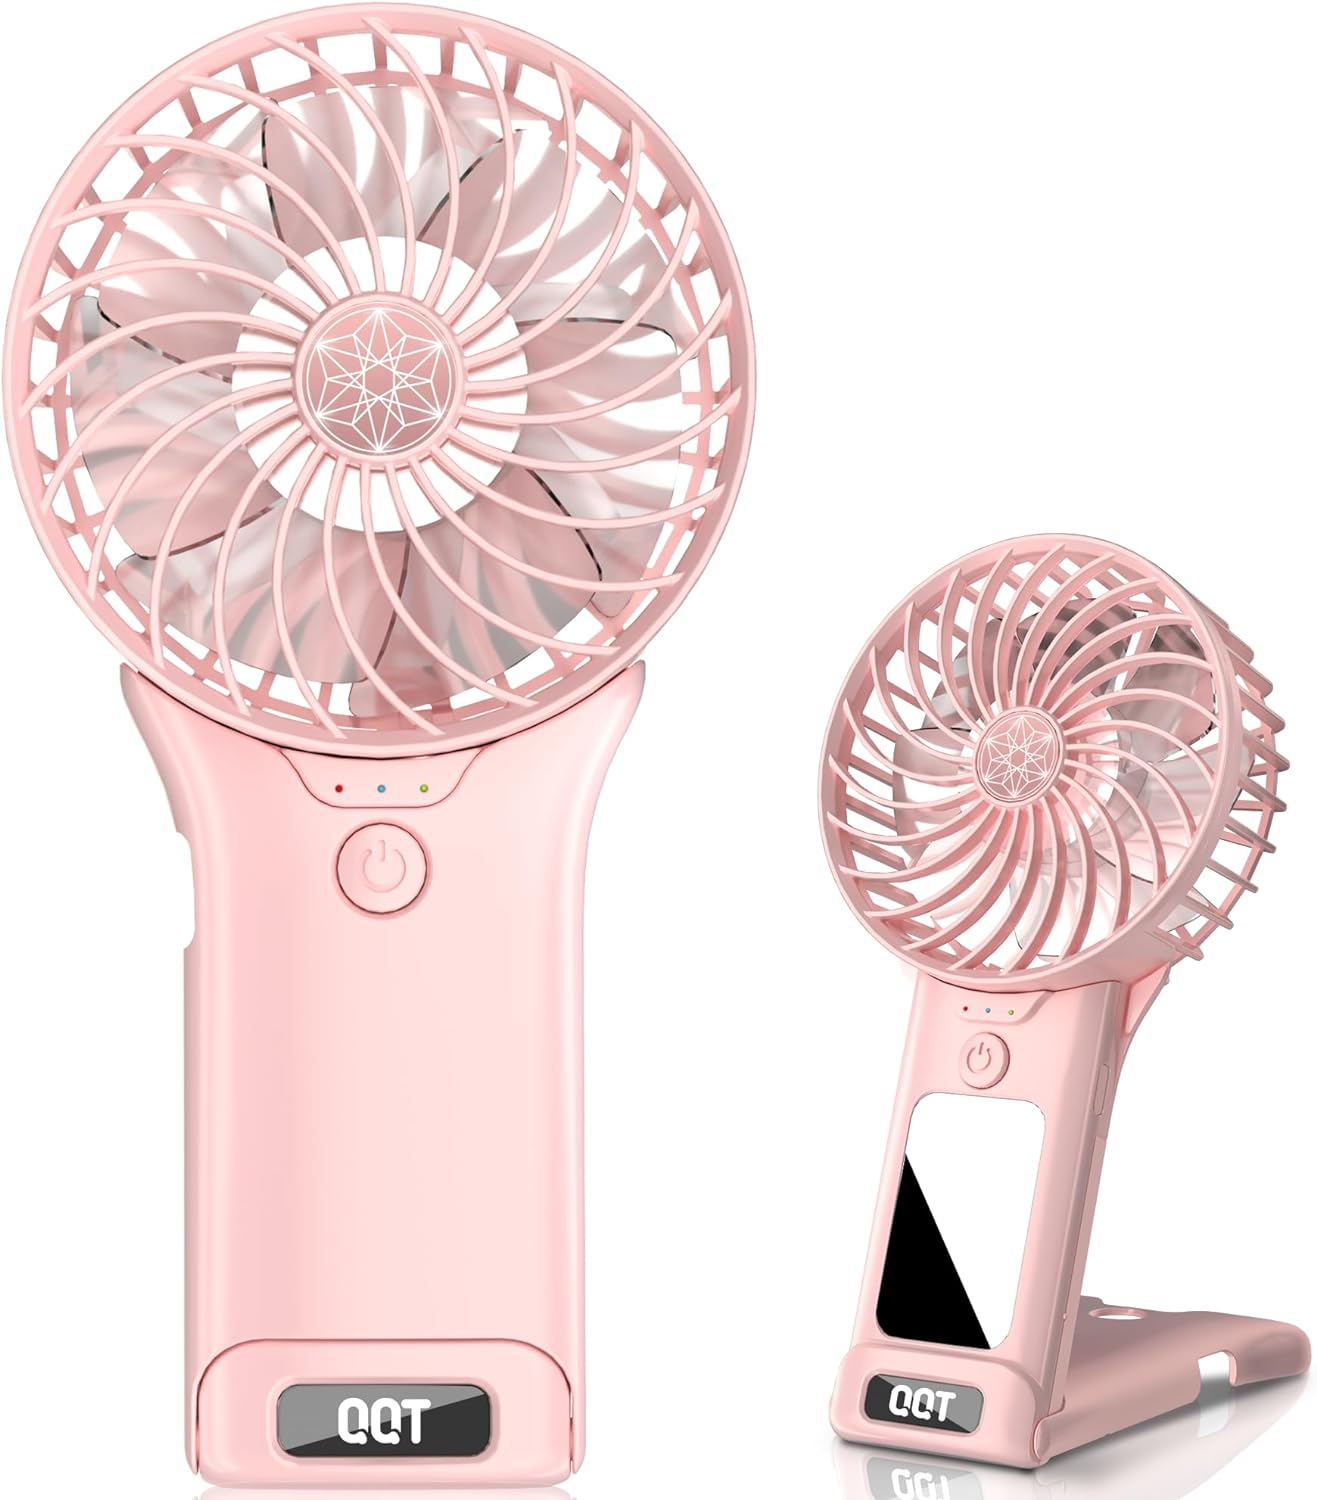 Mini Handheld Fan,4 Speed Adjustable Portable Battery Operated Fans,USB Rechargeable Desk Fan with Mirror,Max 20 Hrs Hand Fan For Travel Office Outdoor Women Men (Pink)